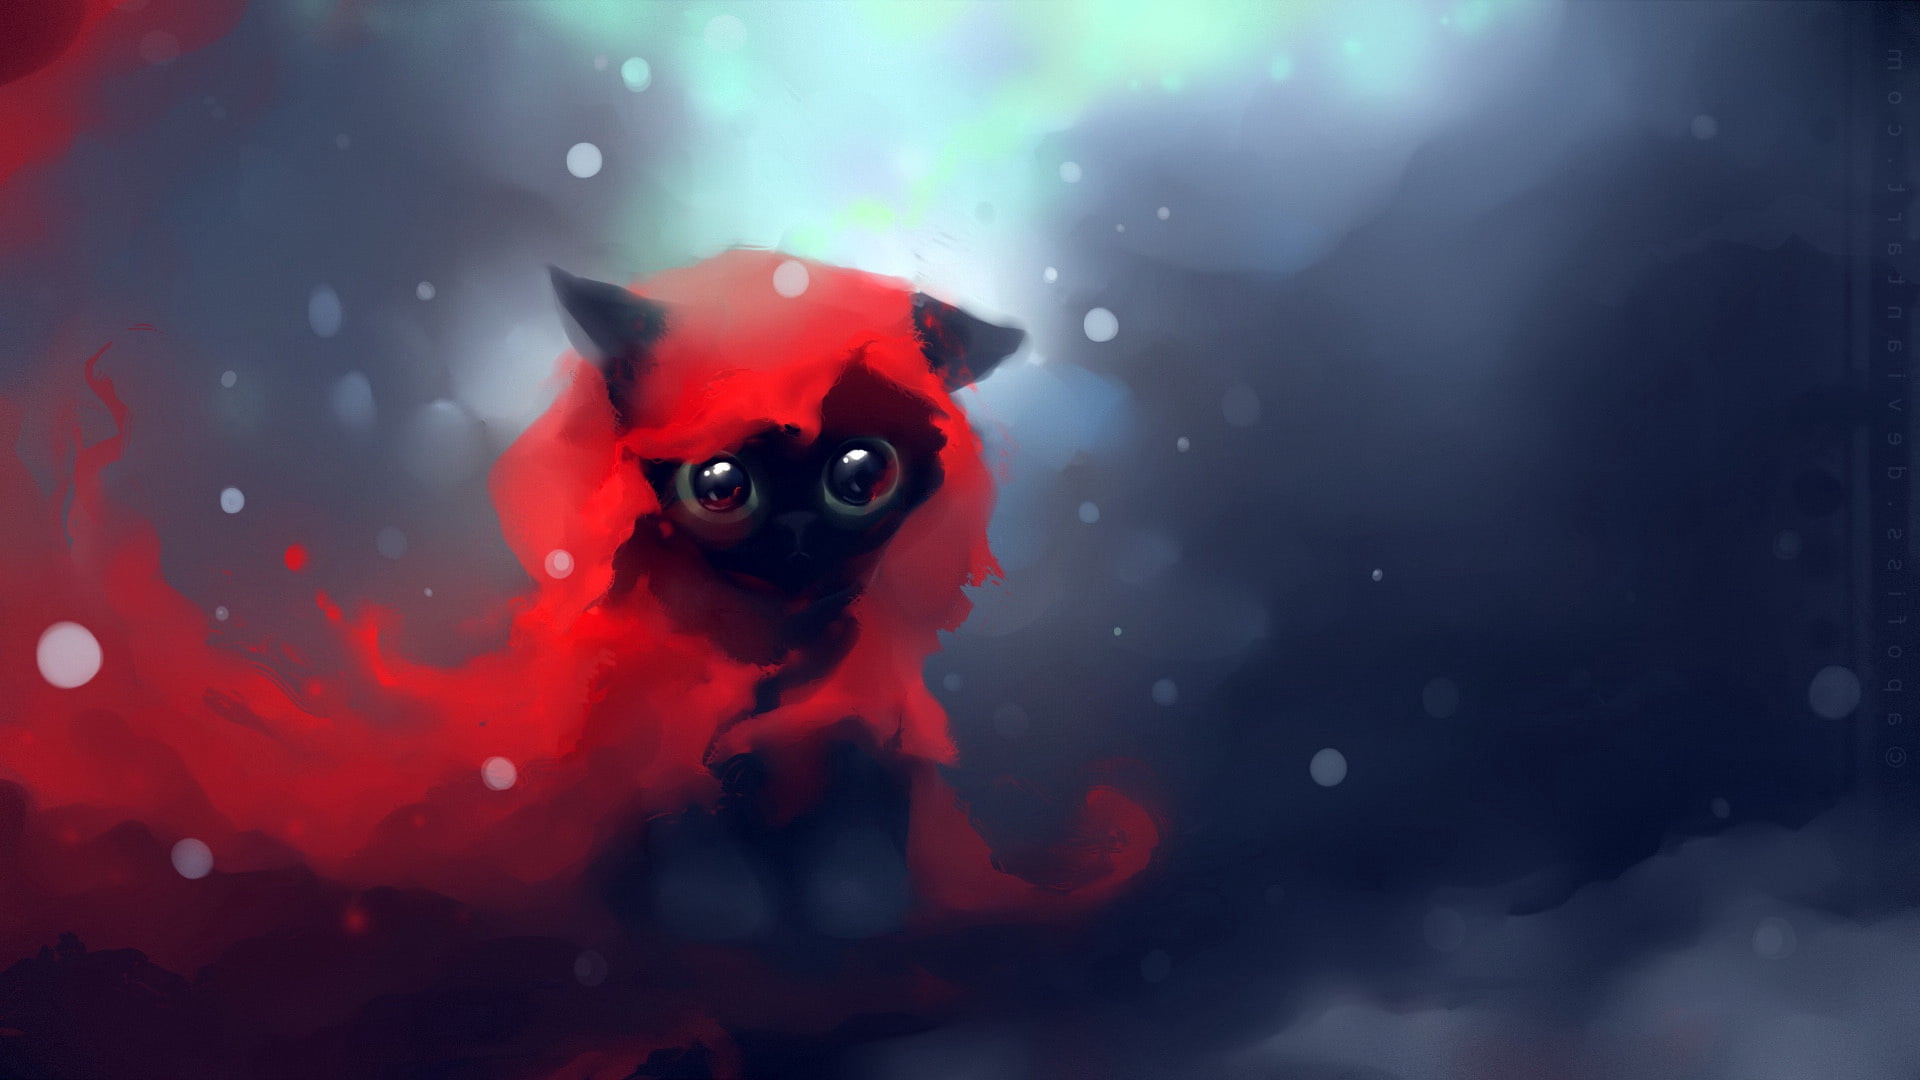 red and black animal graphic, cat, drawing, art, apofiss, night